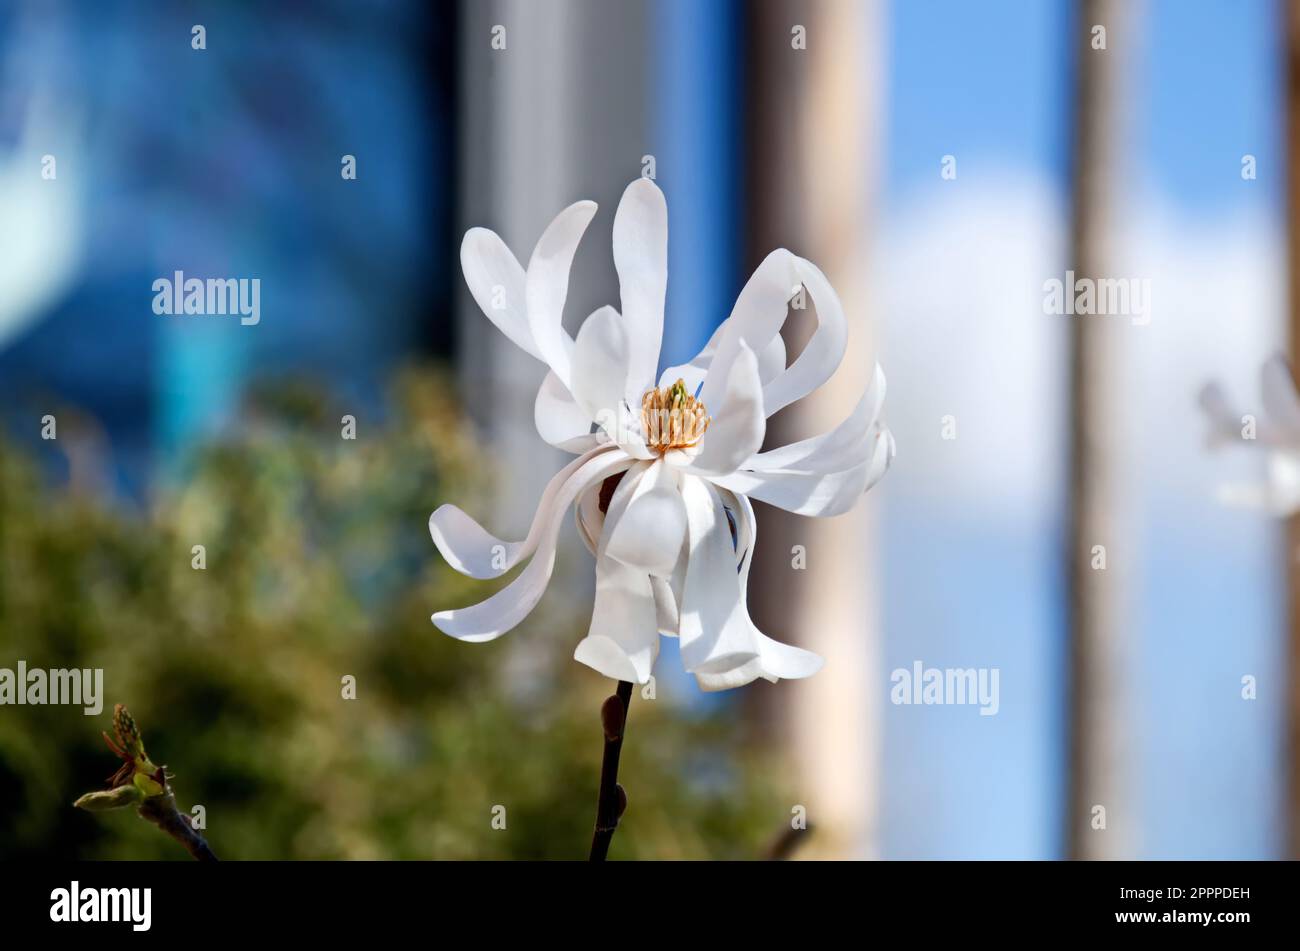 Twig with white bloom and leaves of magnolia tree at springtime in garden, Sofia, Bulgaria Stock Photo